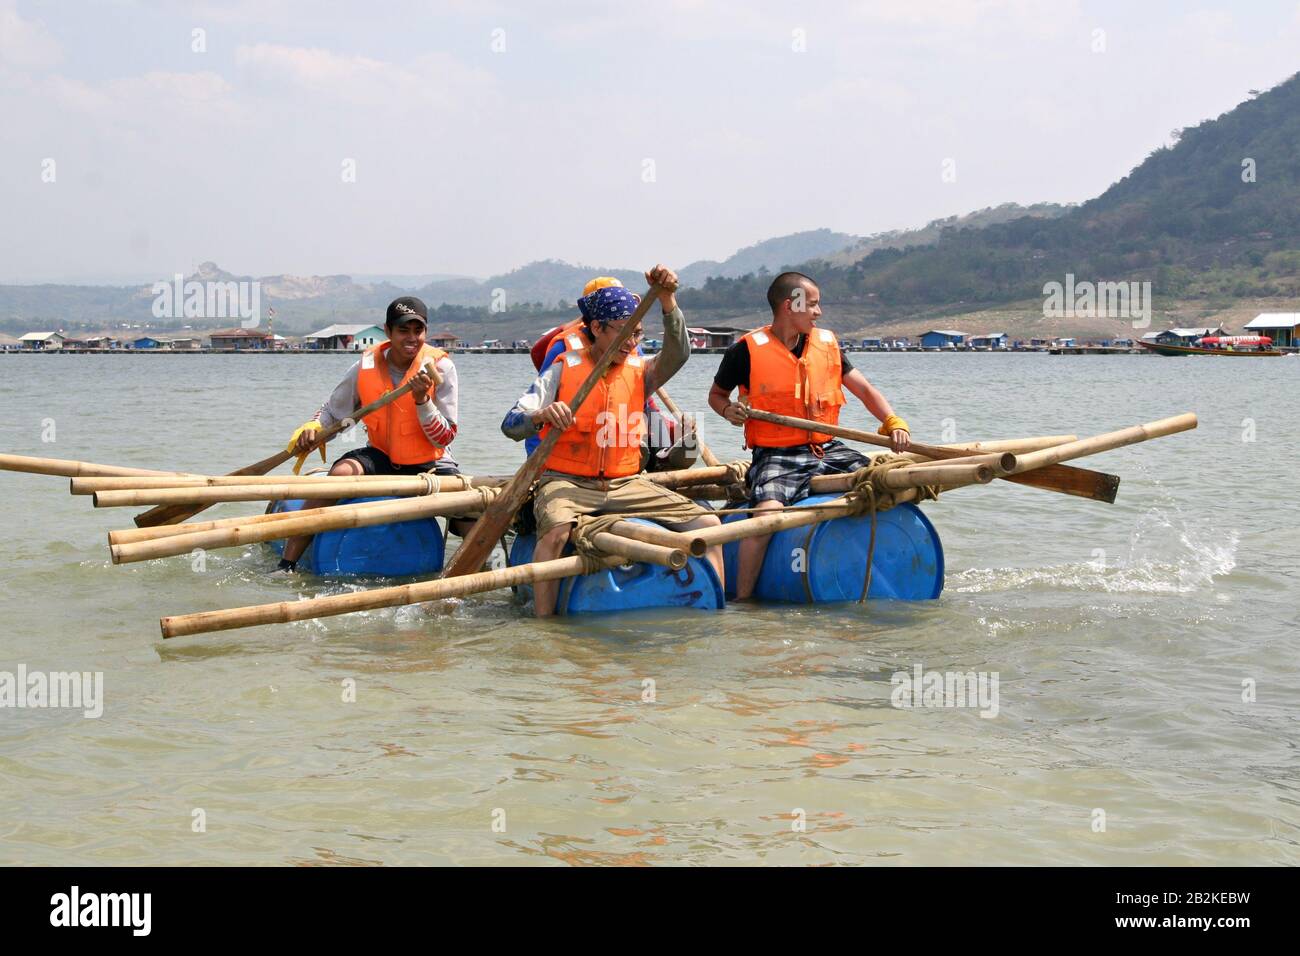 A group of young people are rowing an emergency boat made of bamboo sticks, plastic barrels and ropes in an outdoor survival training. Stock Photo